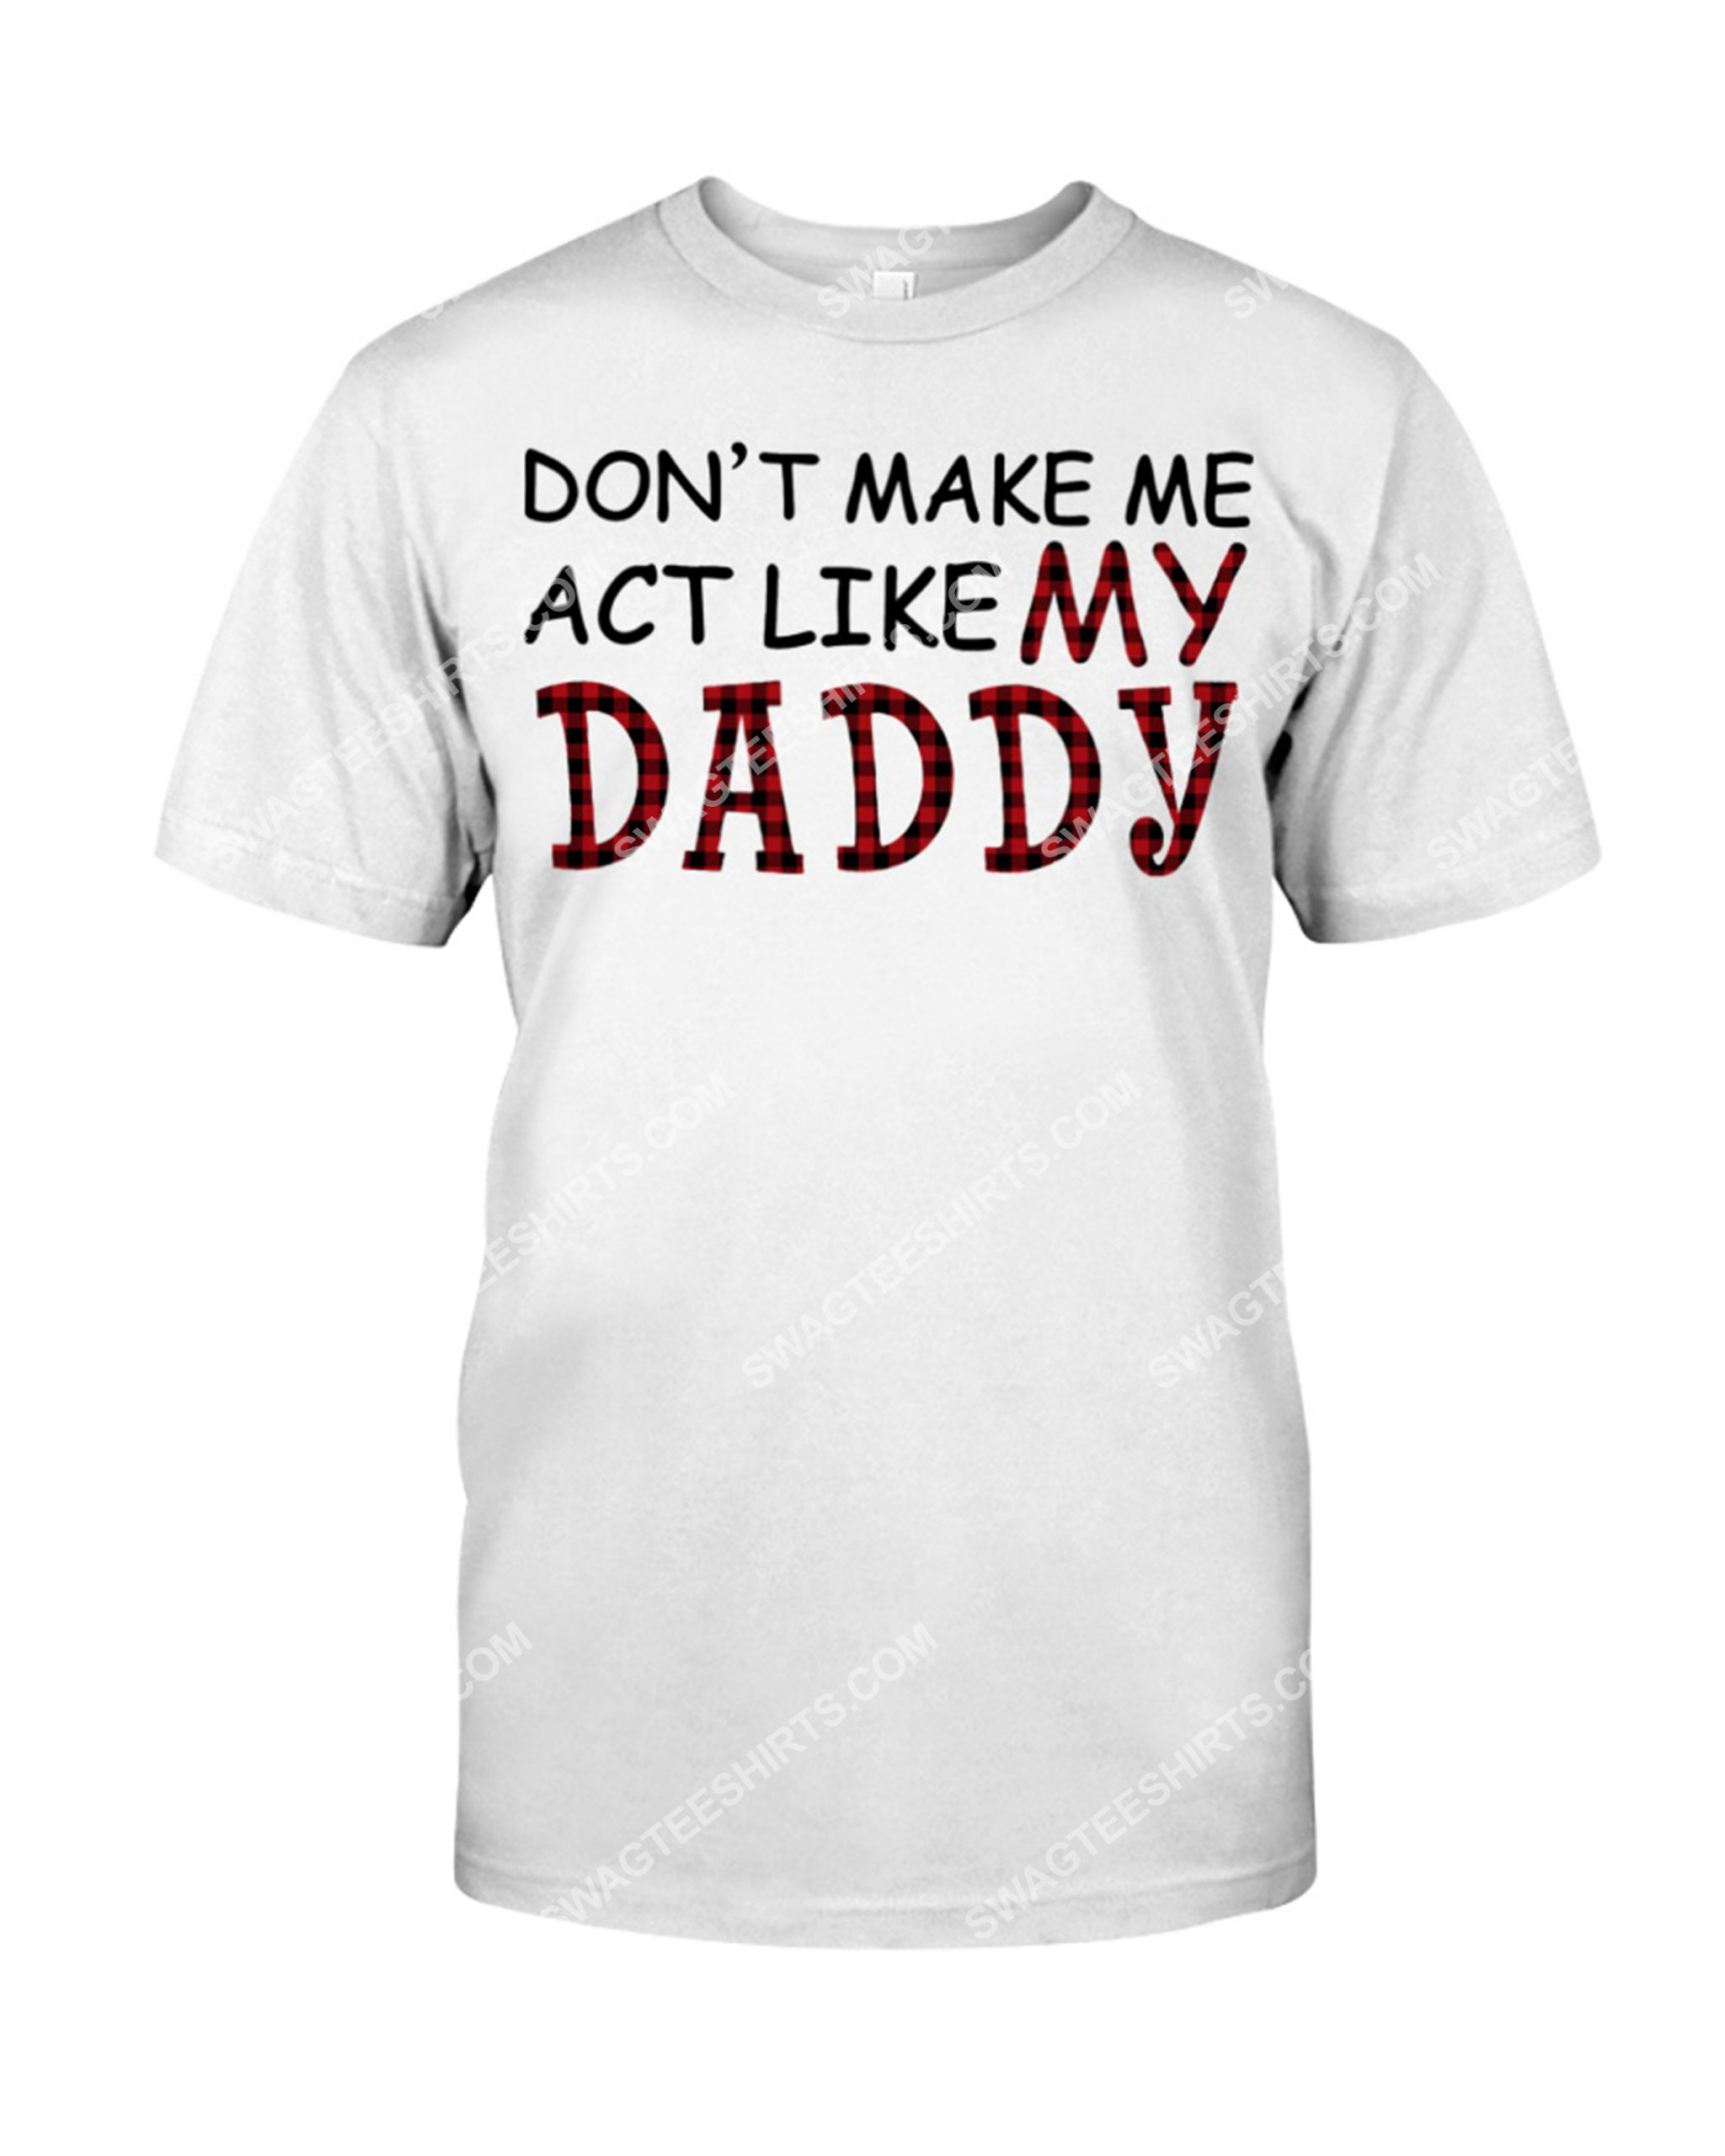 don't make me act like my daddy shirt 1(1)